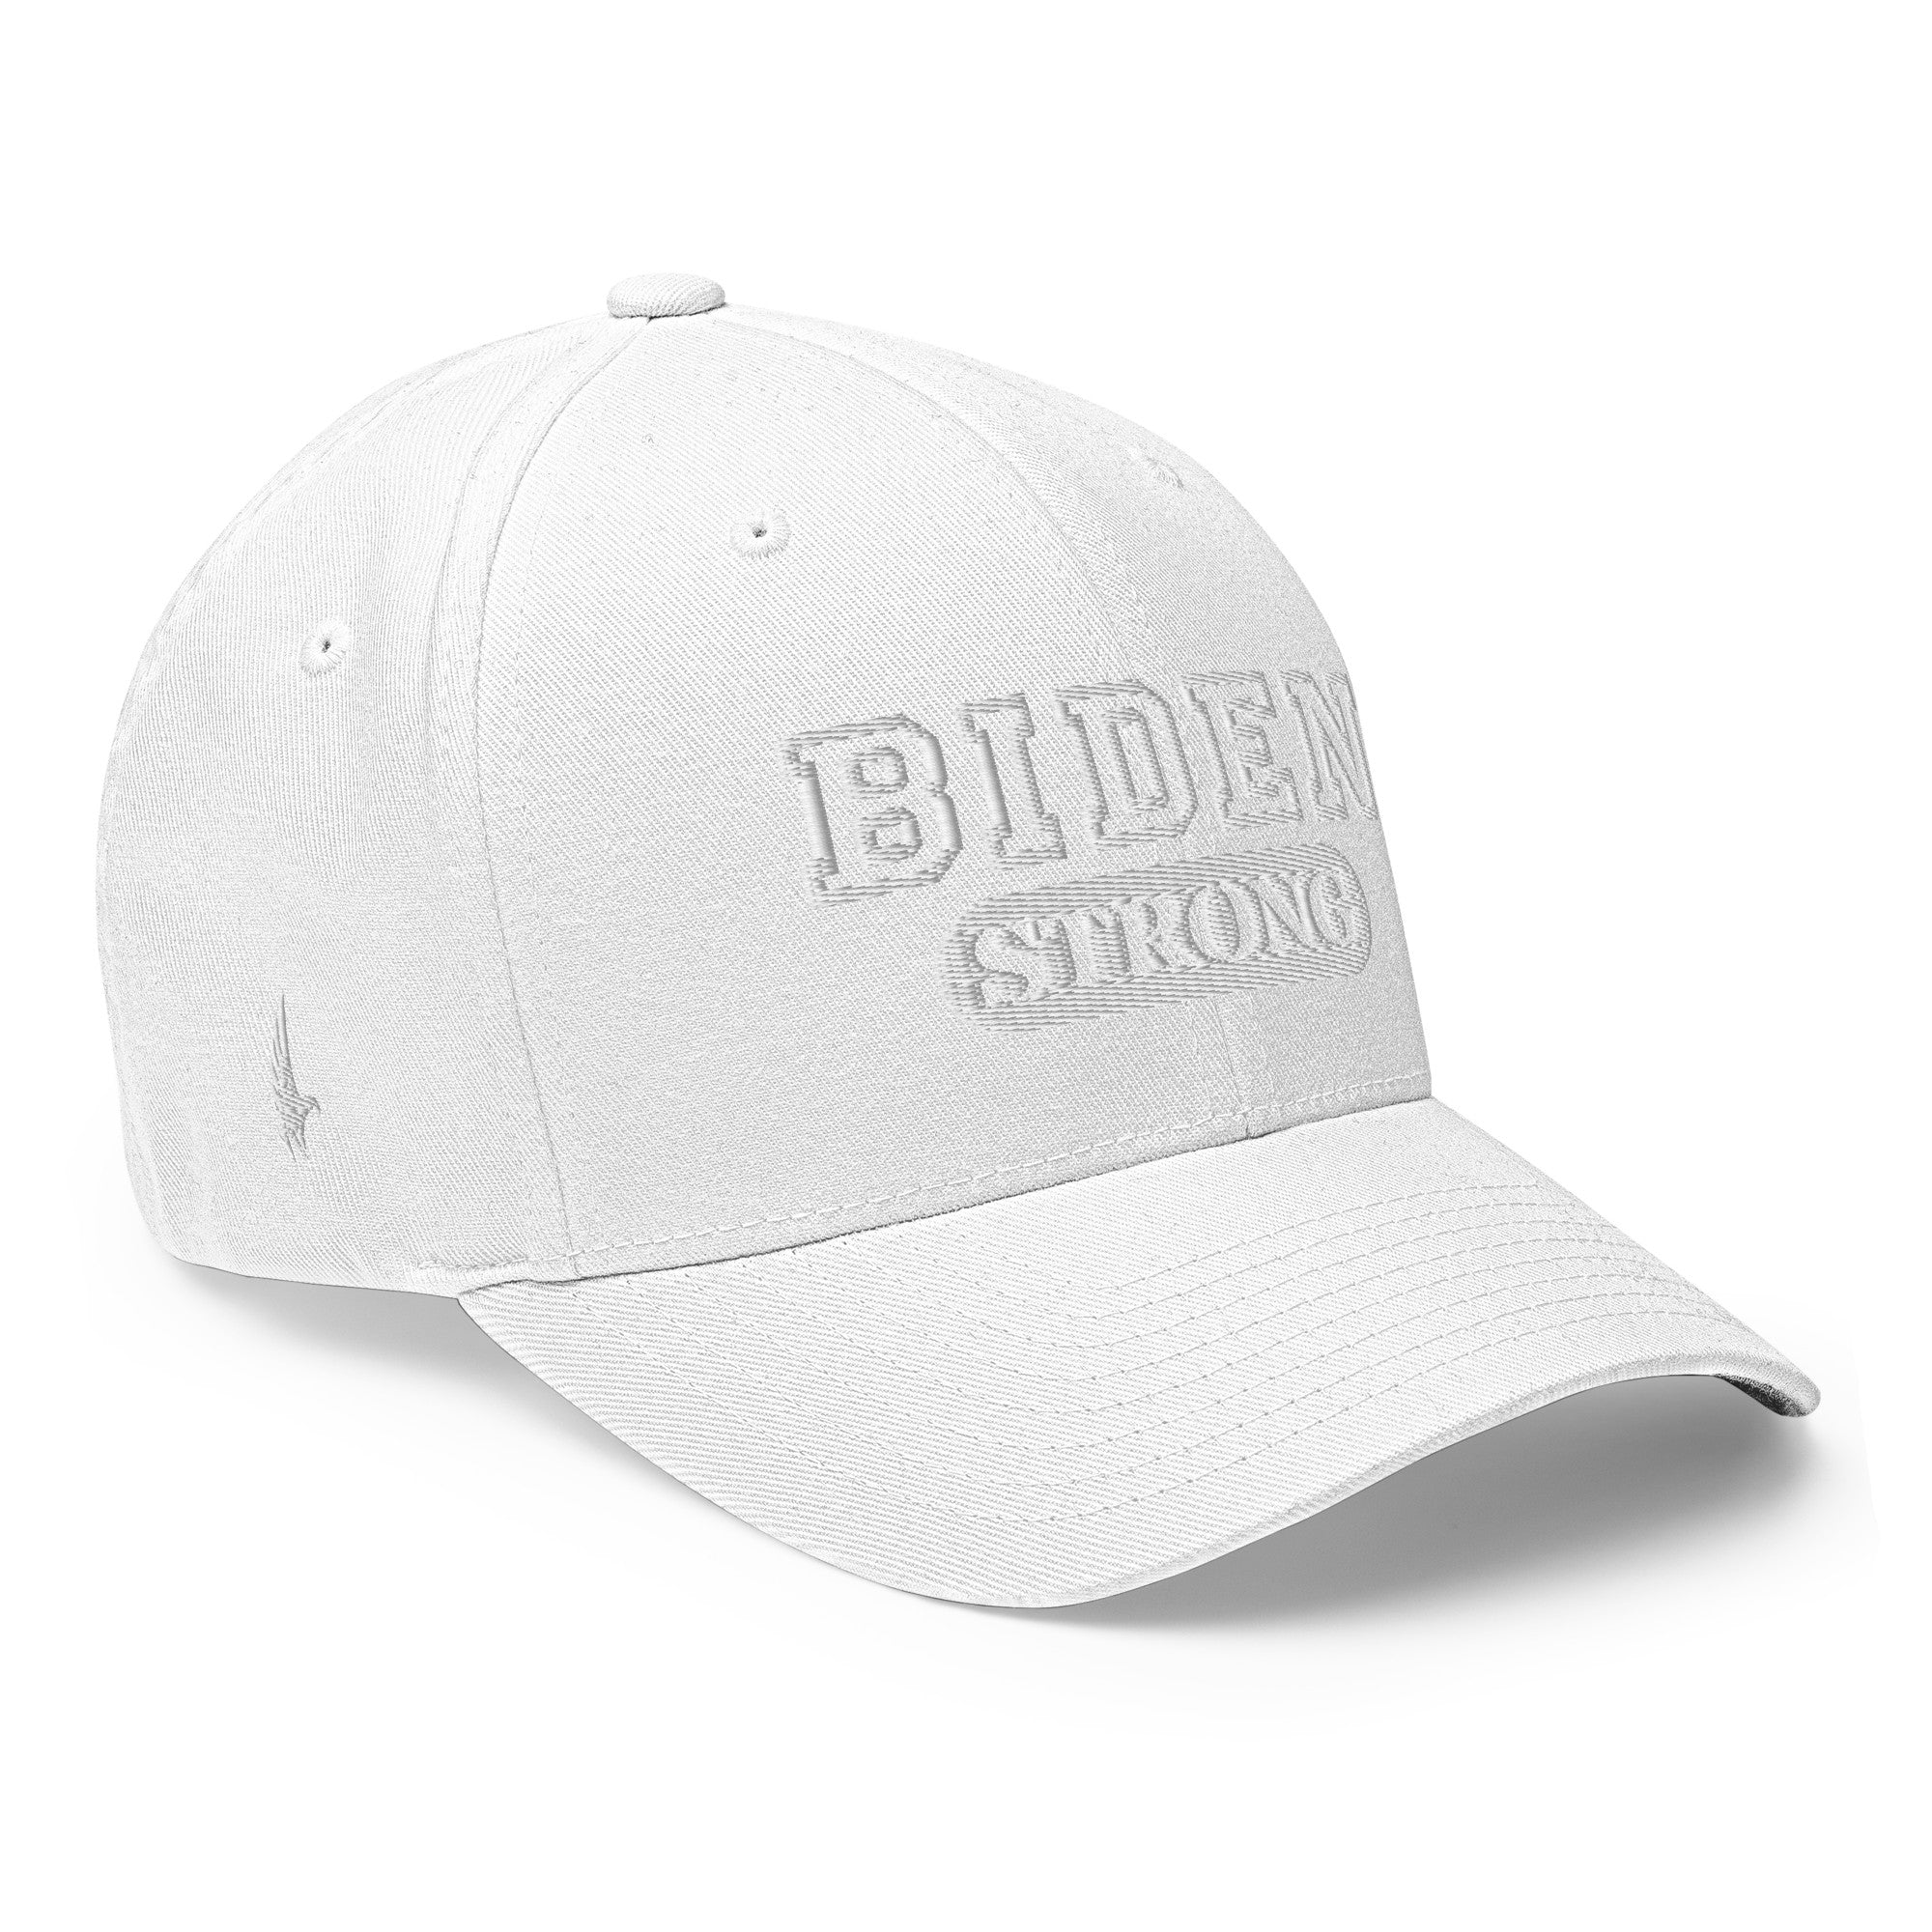 Biden Strong Fitted Hat White White Fitted - Loyalty Vibes